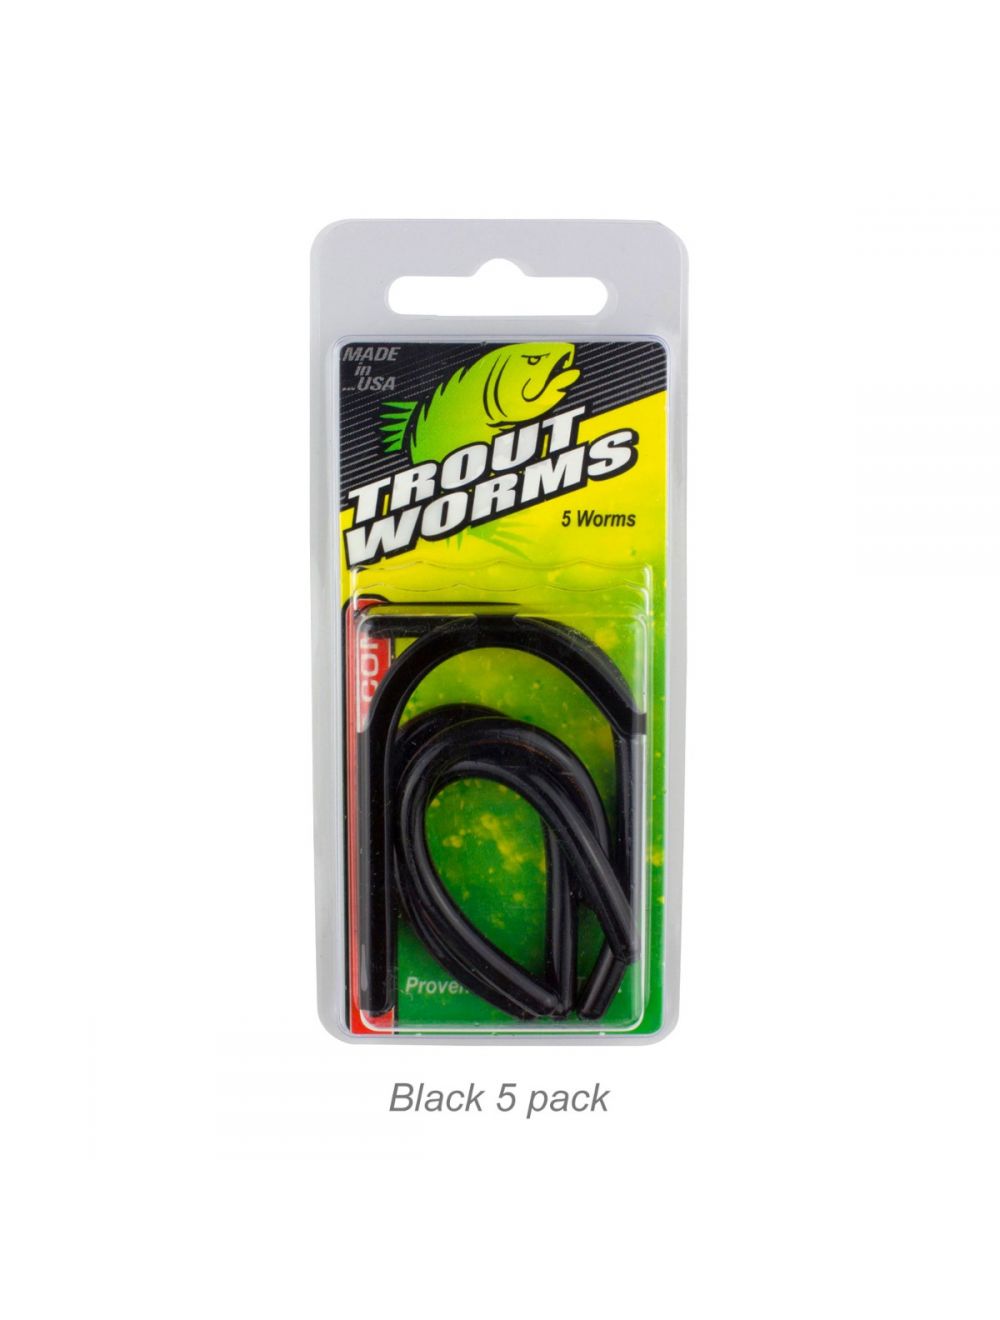 Page 8 - Buy Lelands Lures Products Online at Best Prices in Nigeria